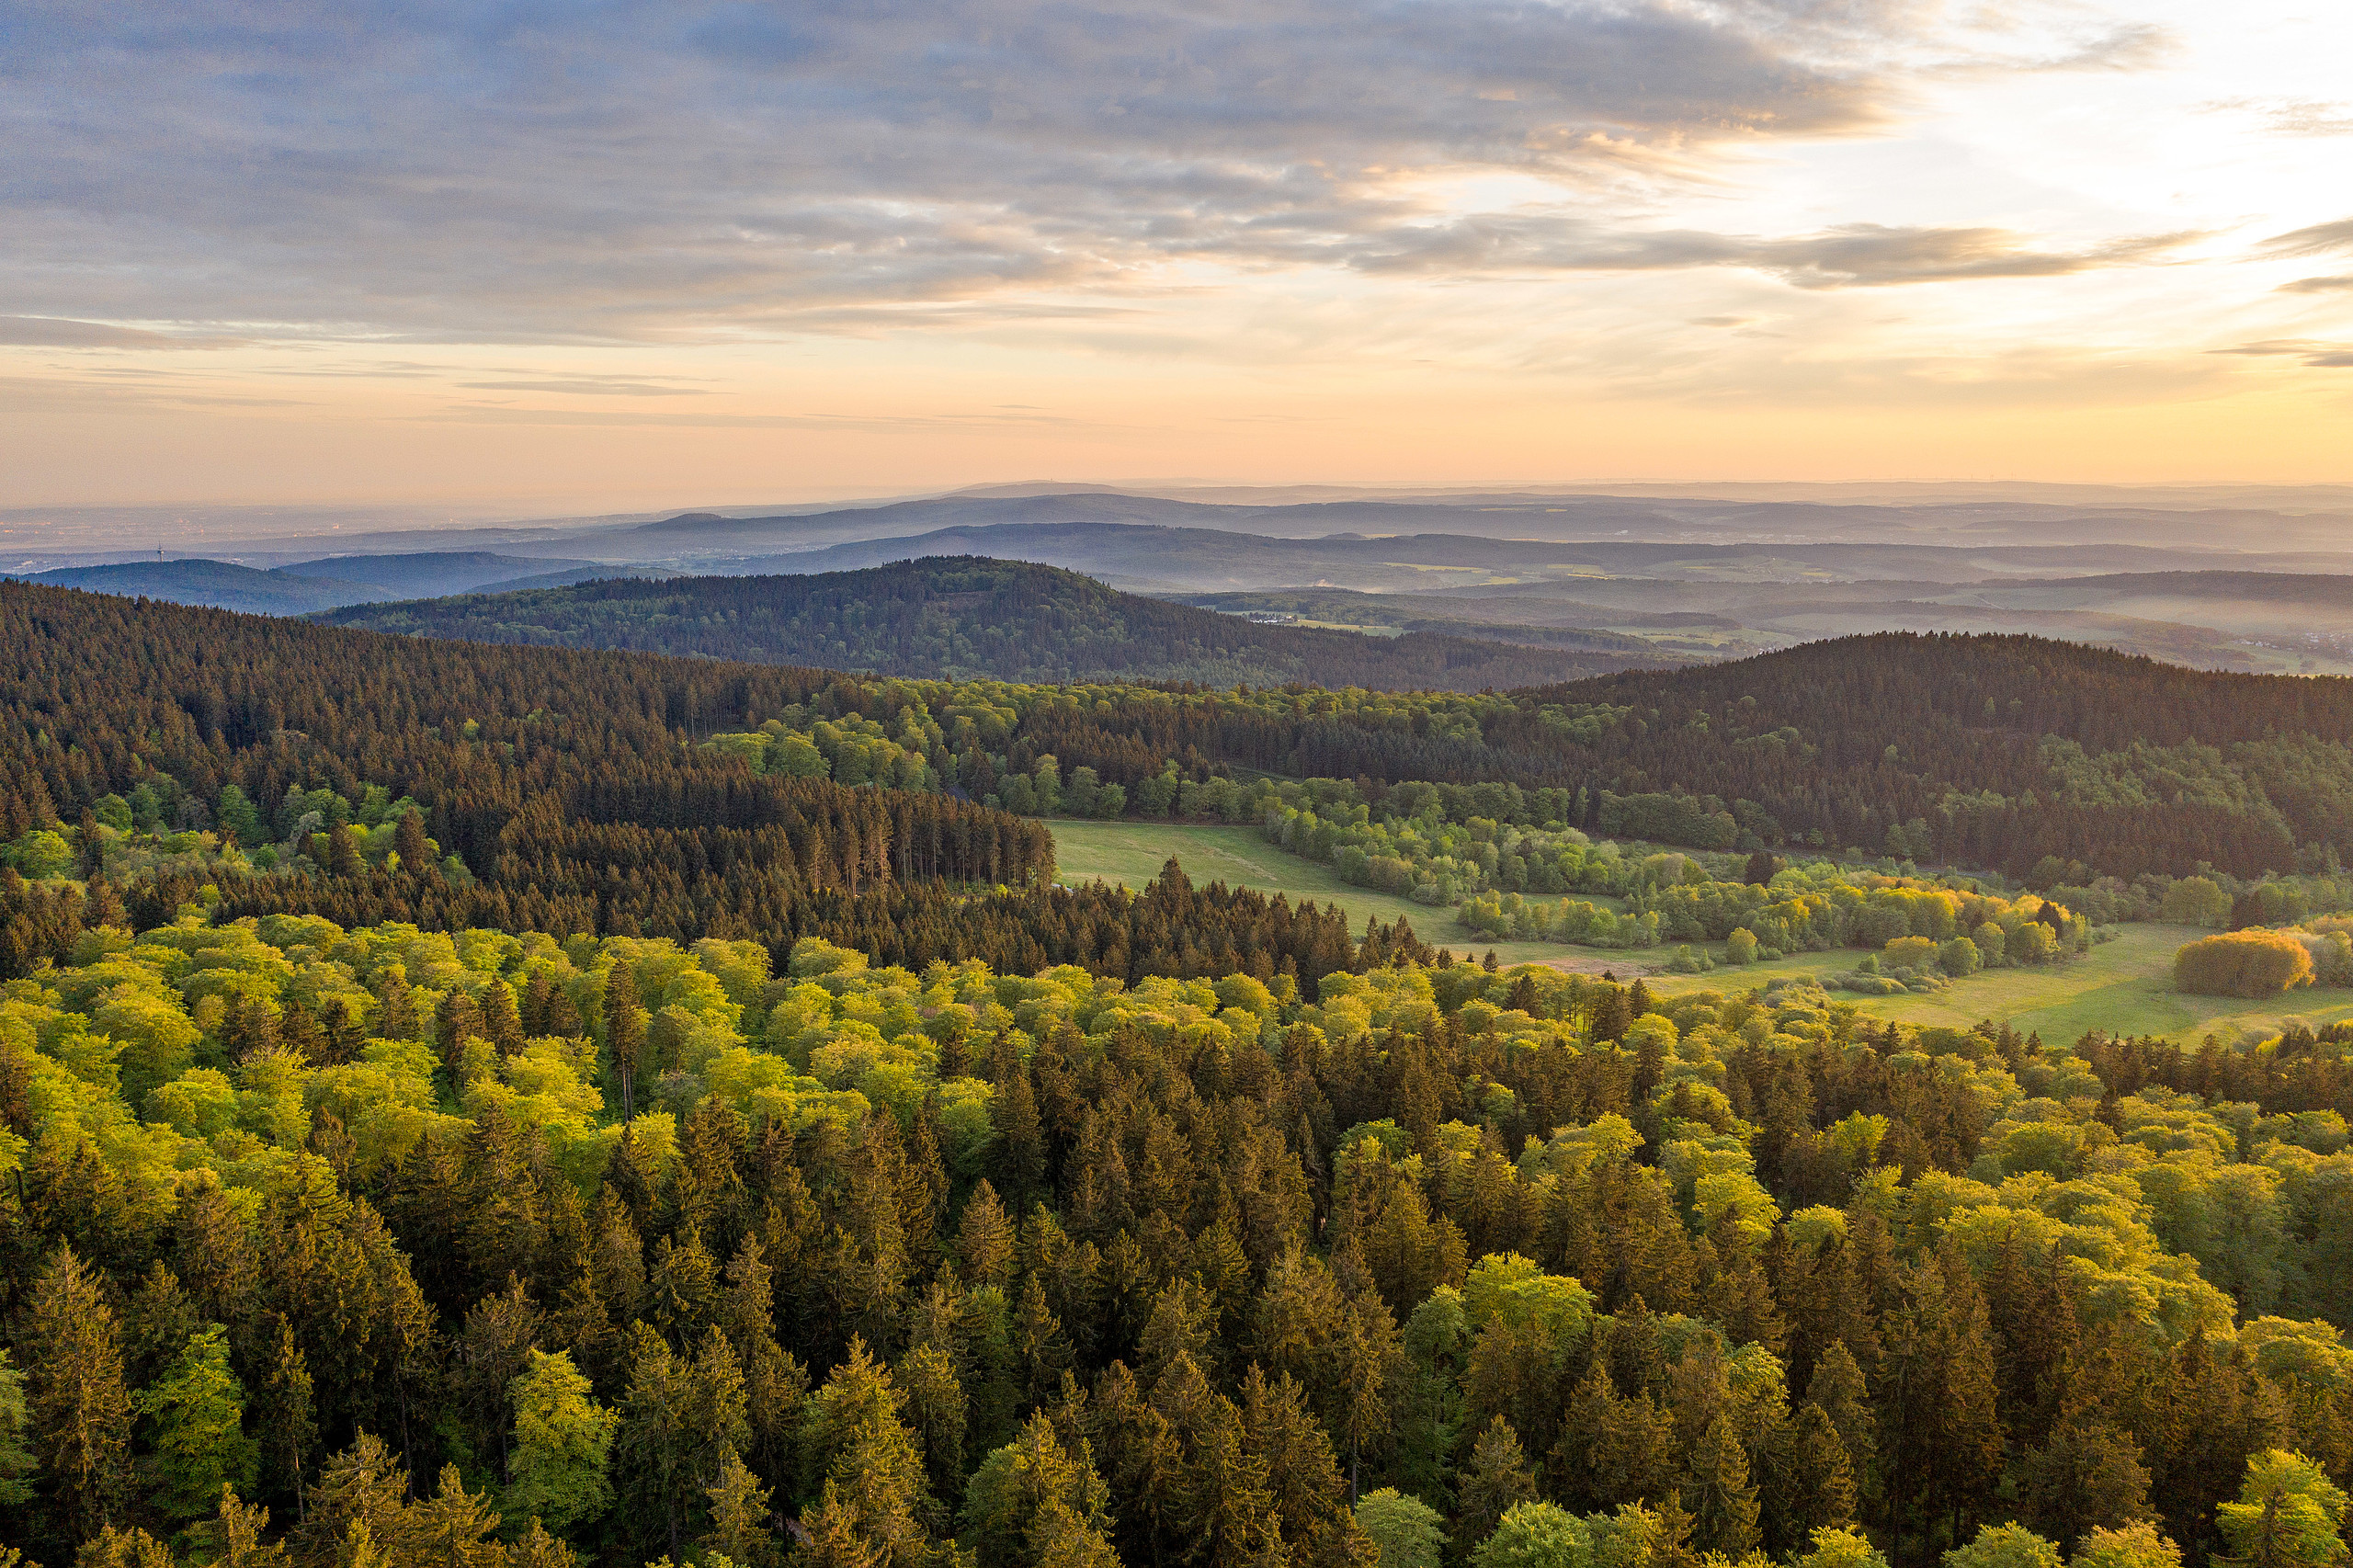 [Translate to English:] Views of the wooded Taunus low mountains in golden sunlight